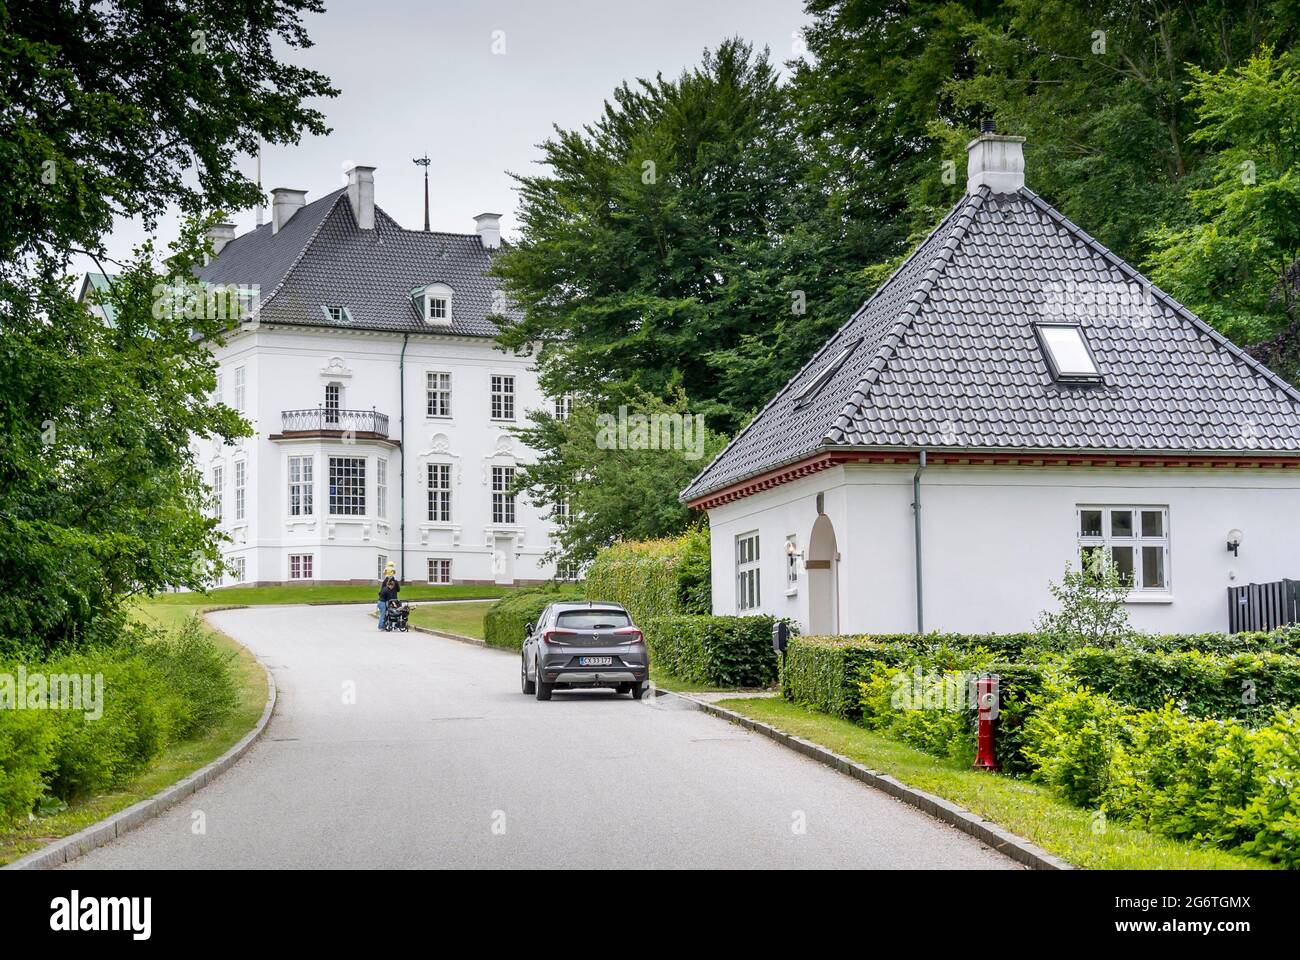 Aarhus, Denmark - 27 June 2021: The exterior of the Royal Marselisborg Palace, People visit the garden around the castle Stock Photo